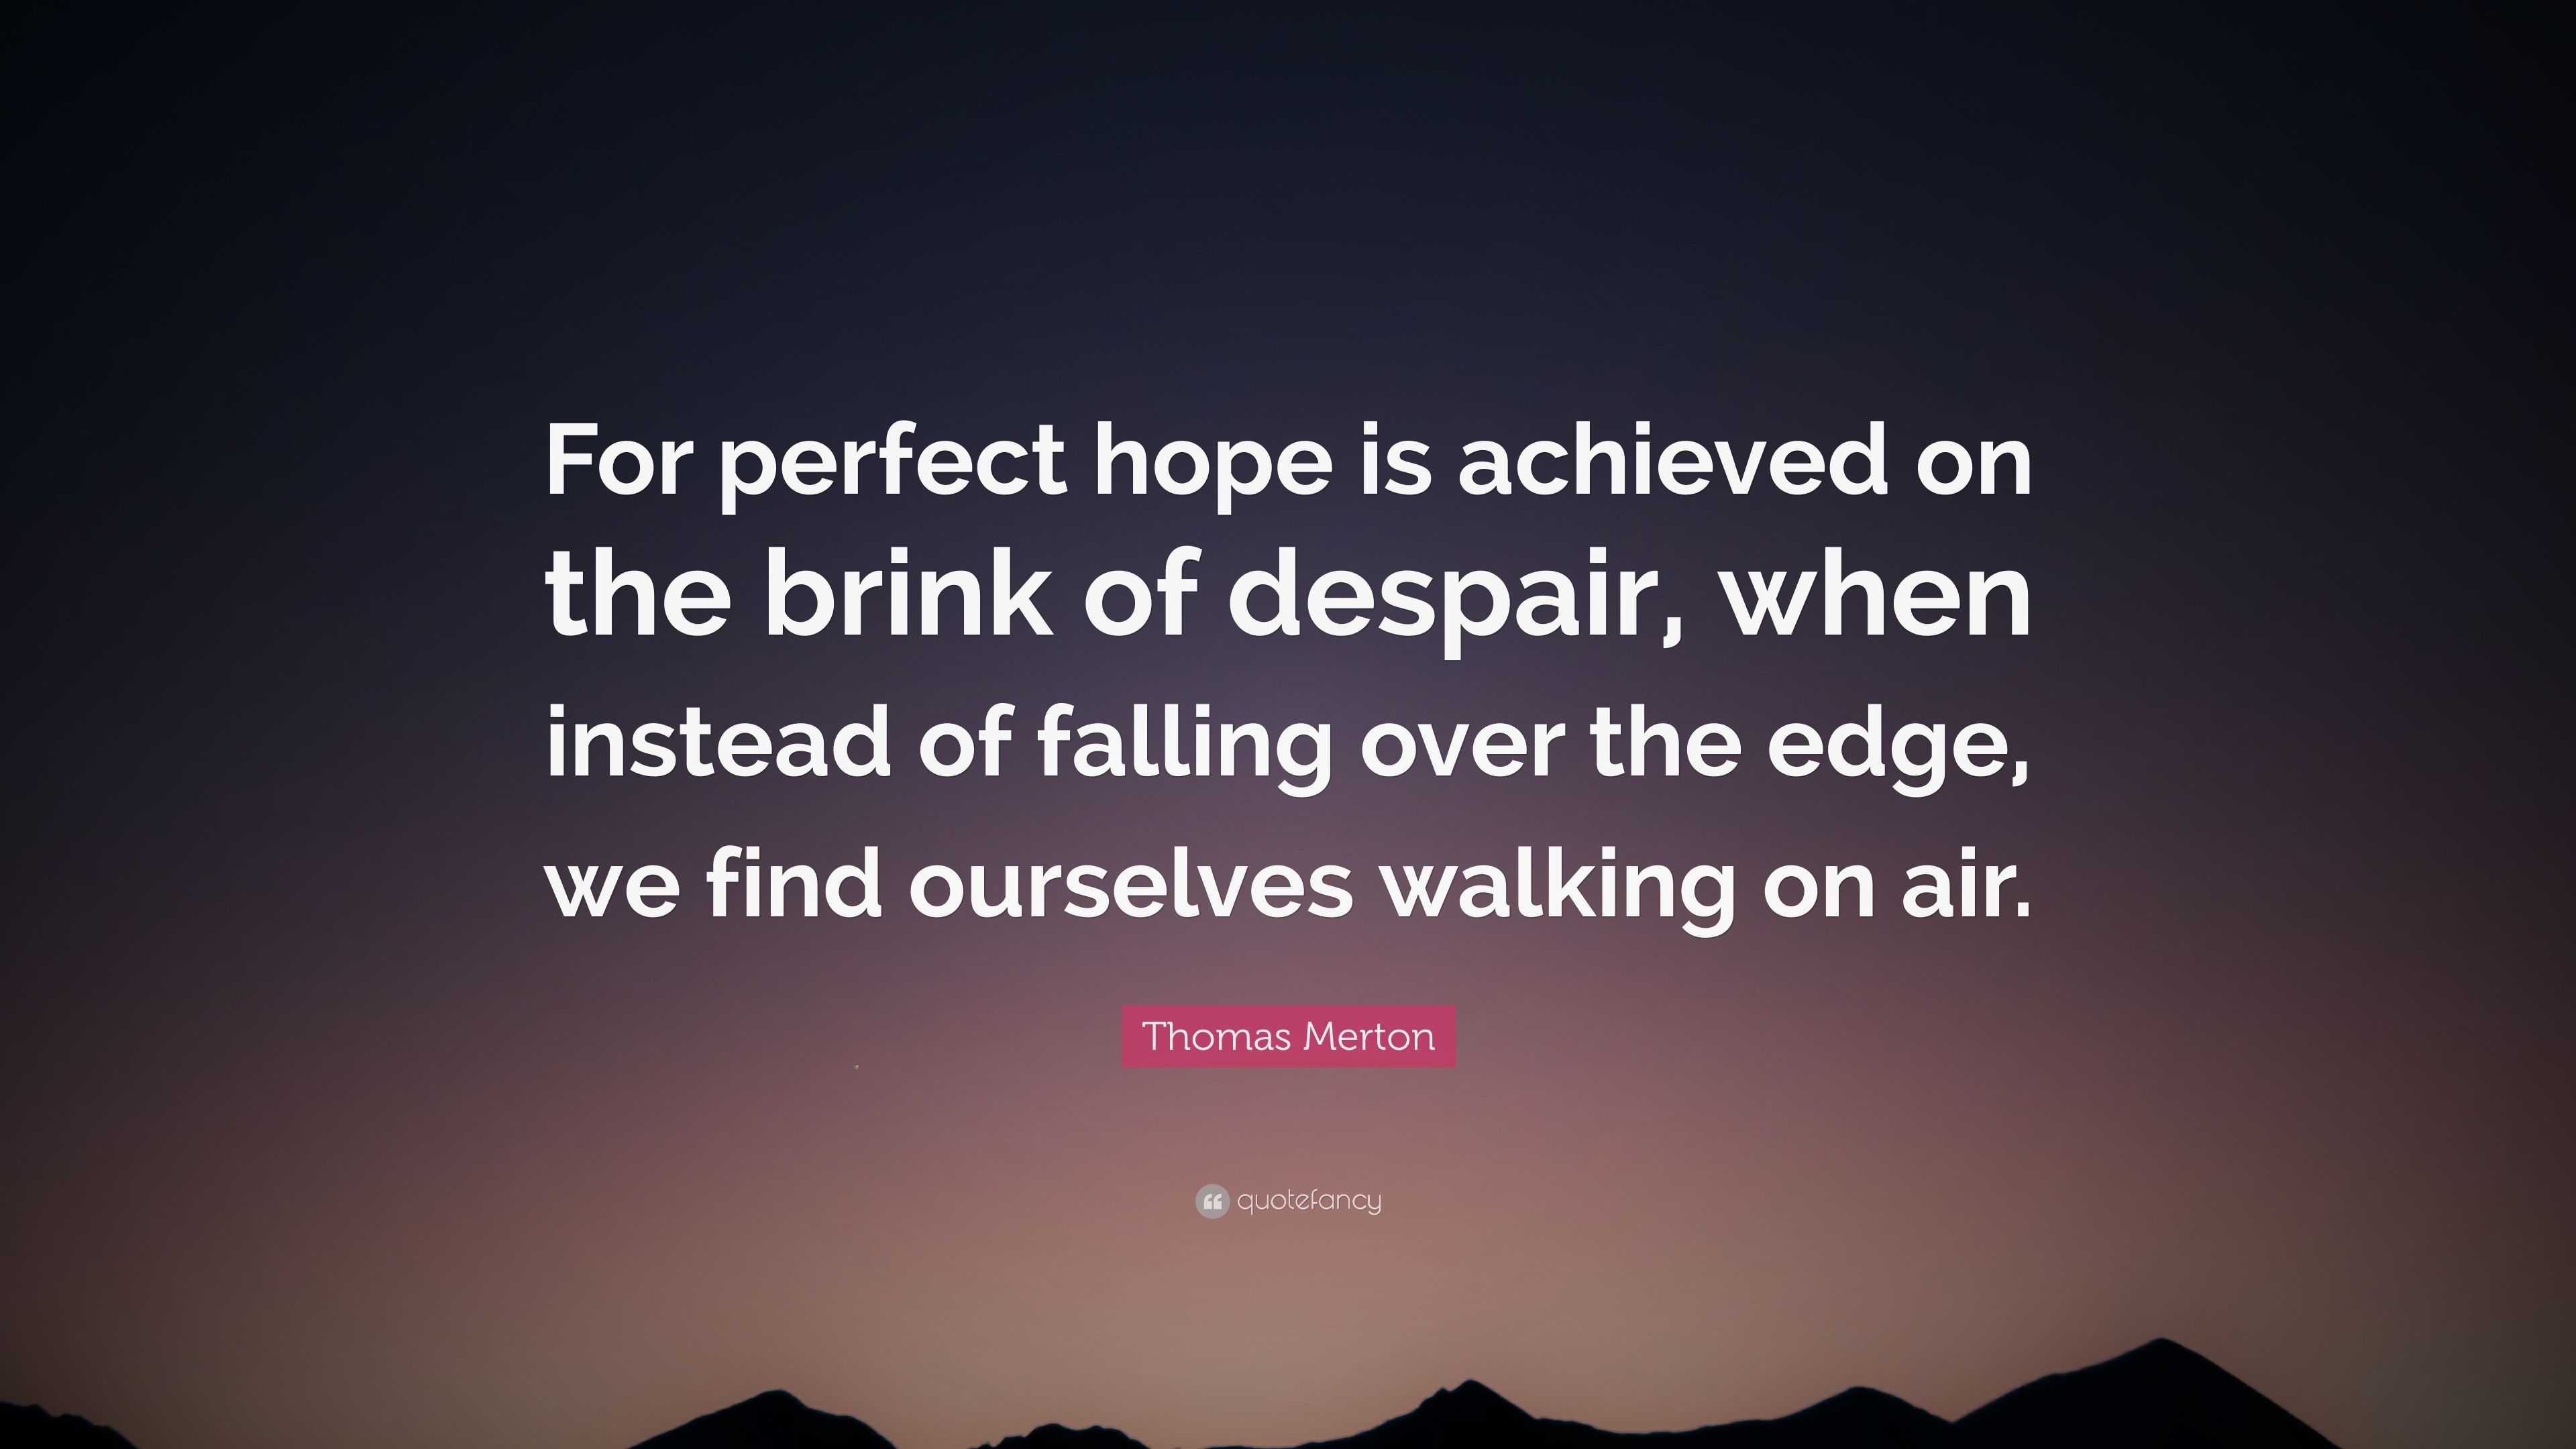 4822744 Thomas Merton Quote For perfect hope is achieved on the brink of